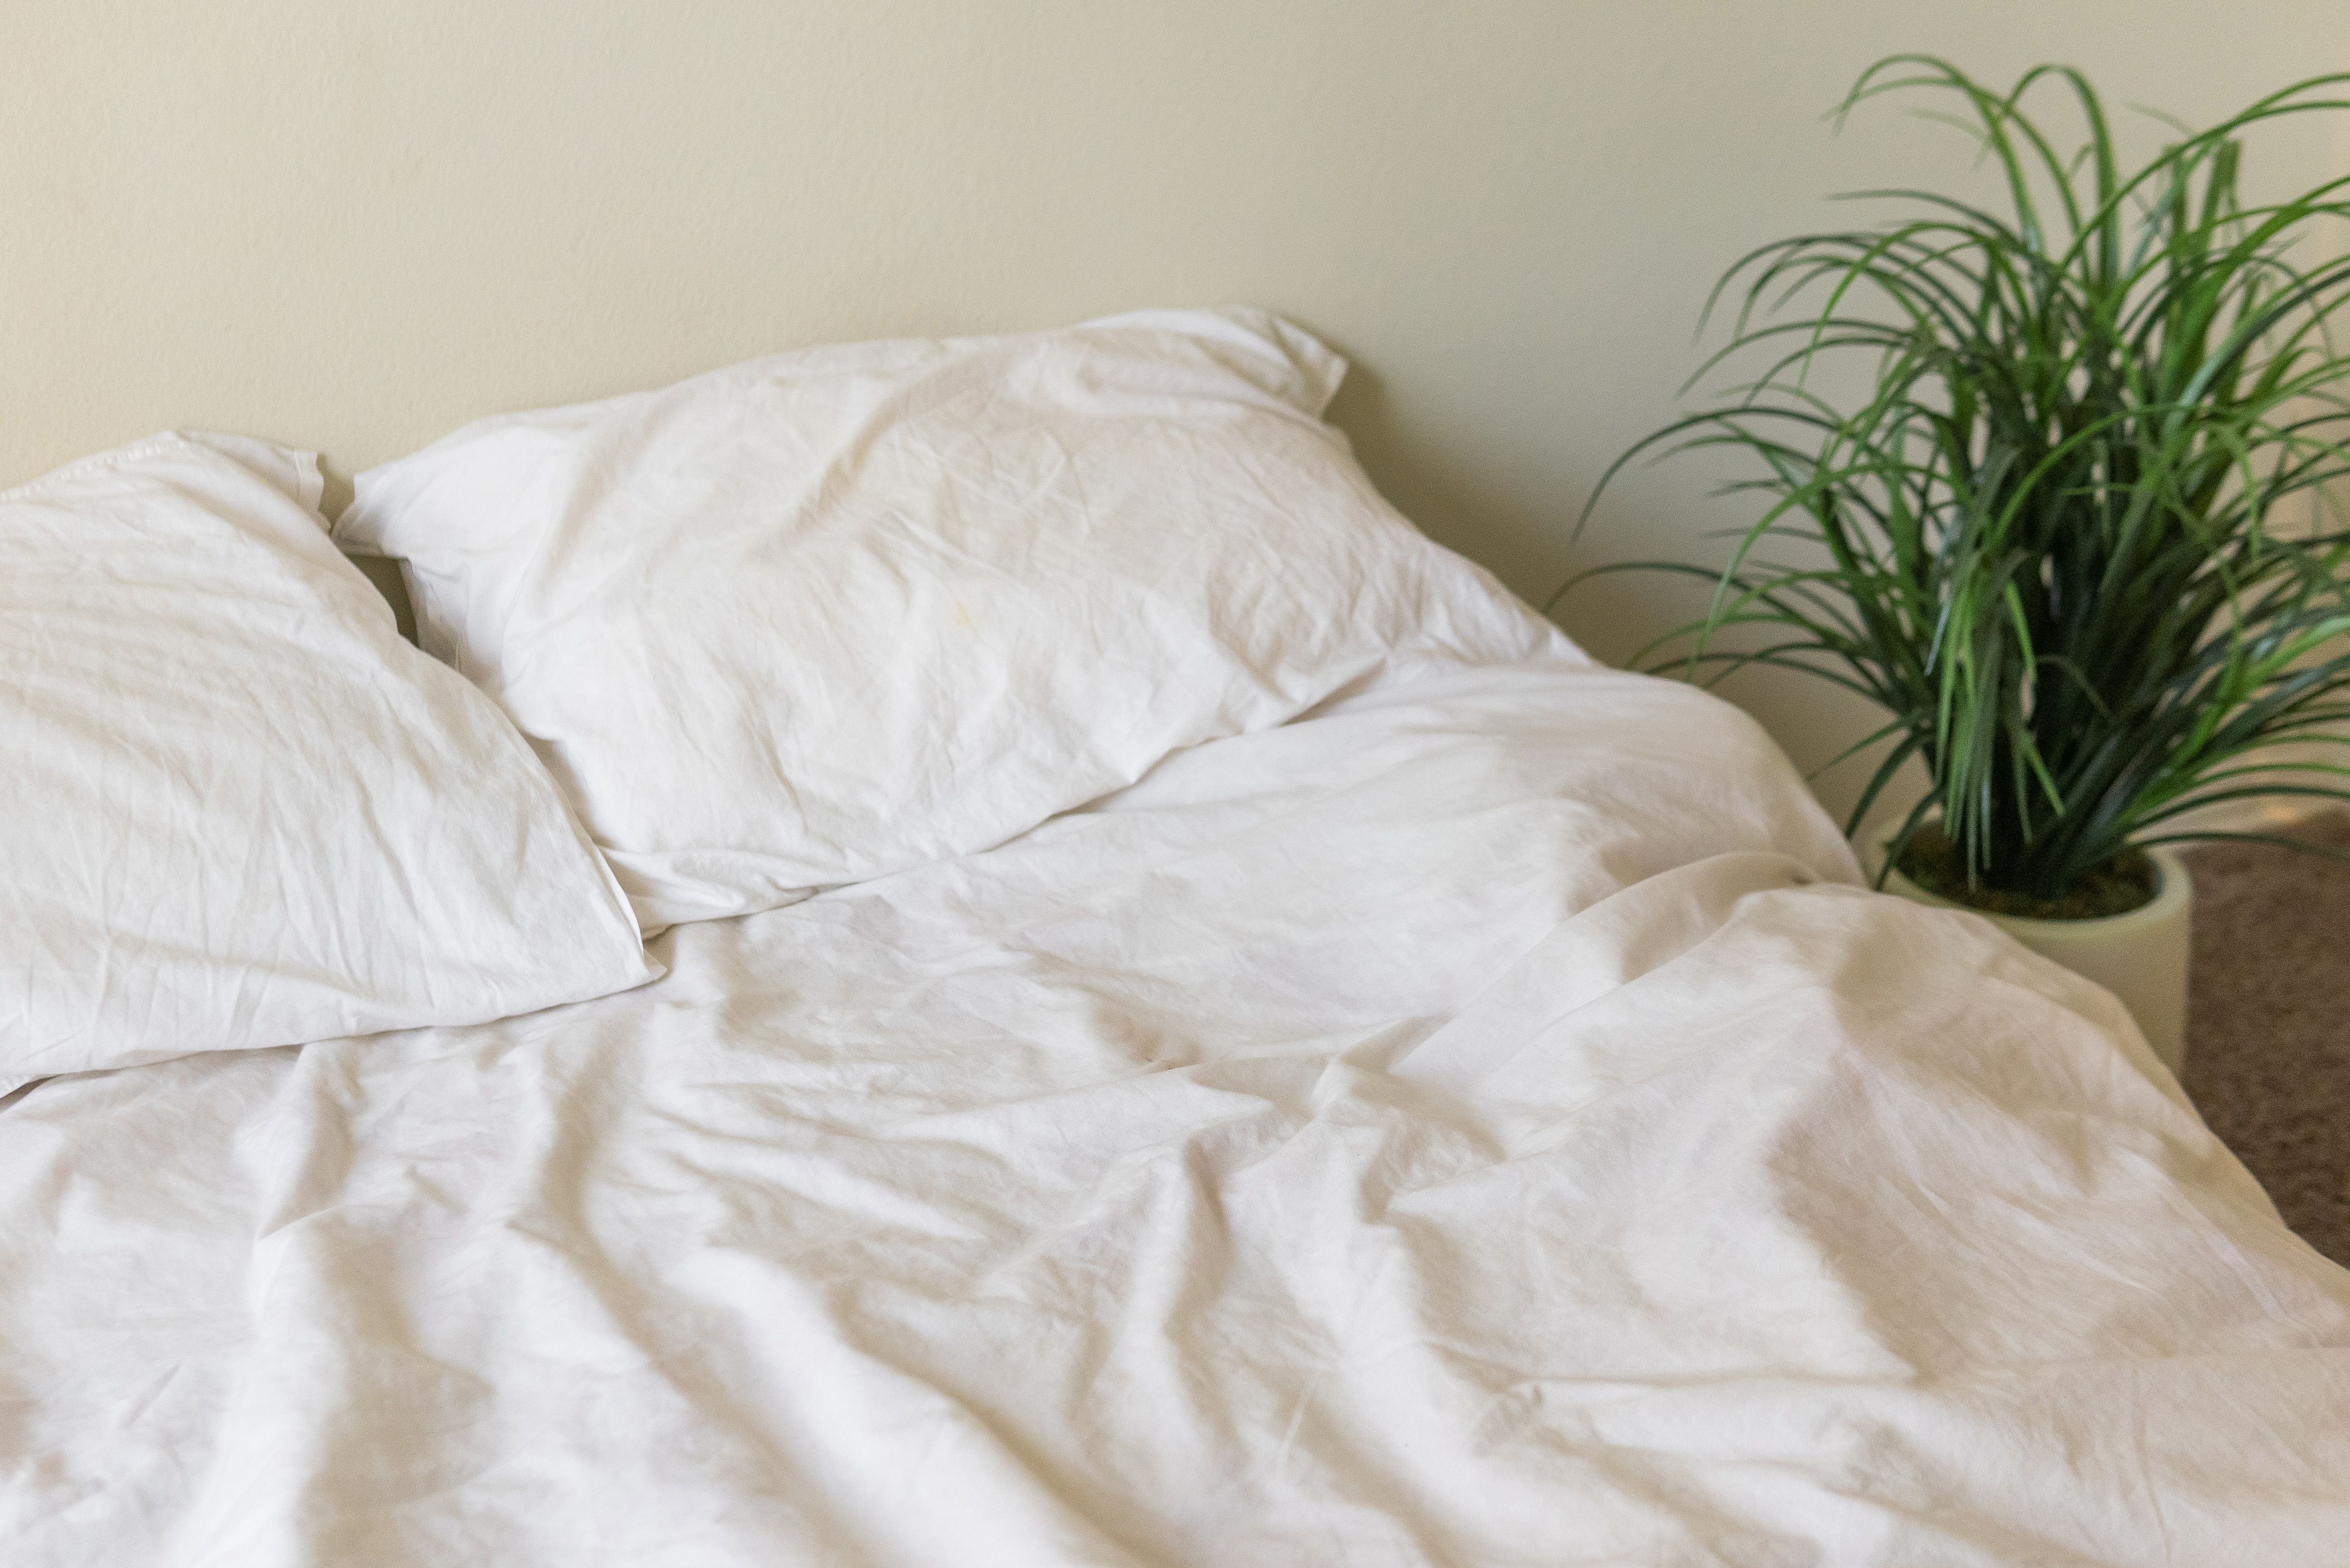 The Easiest Ways to Soften Your Sheets